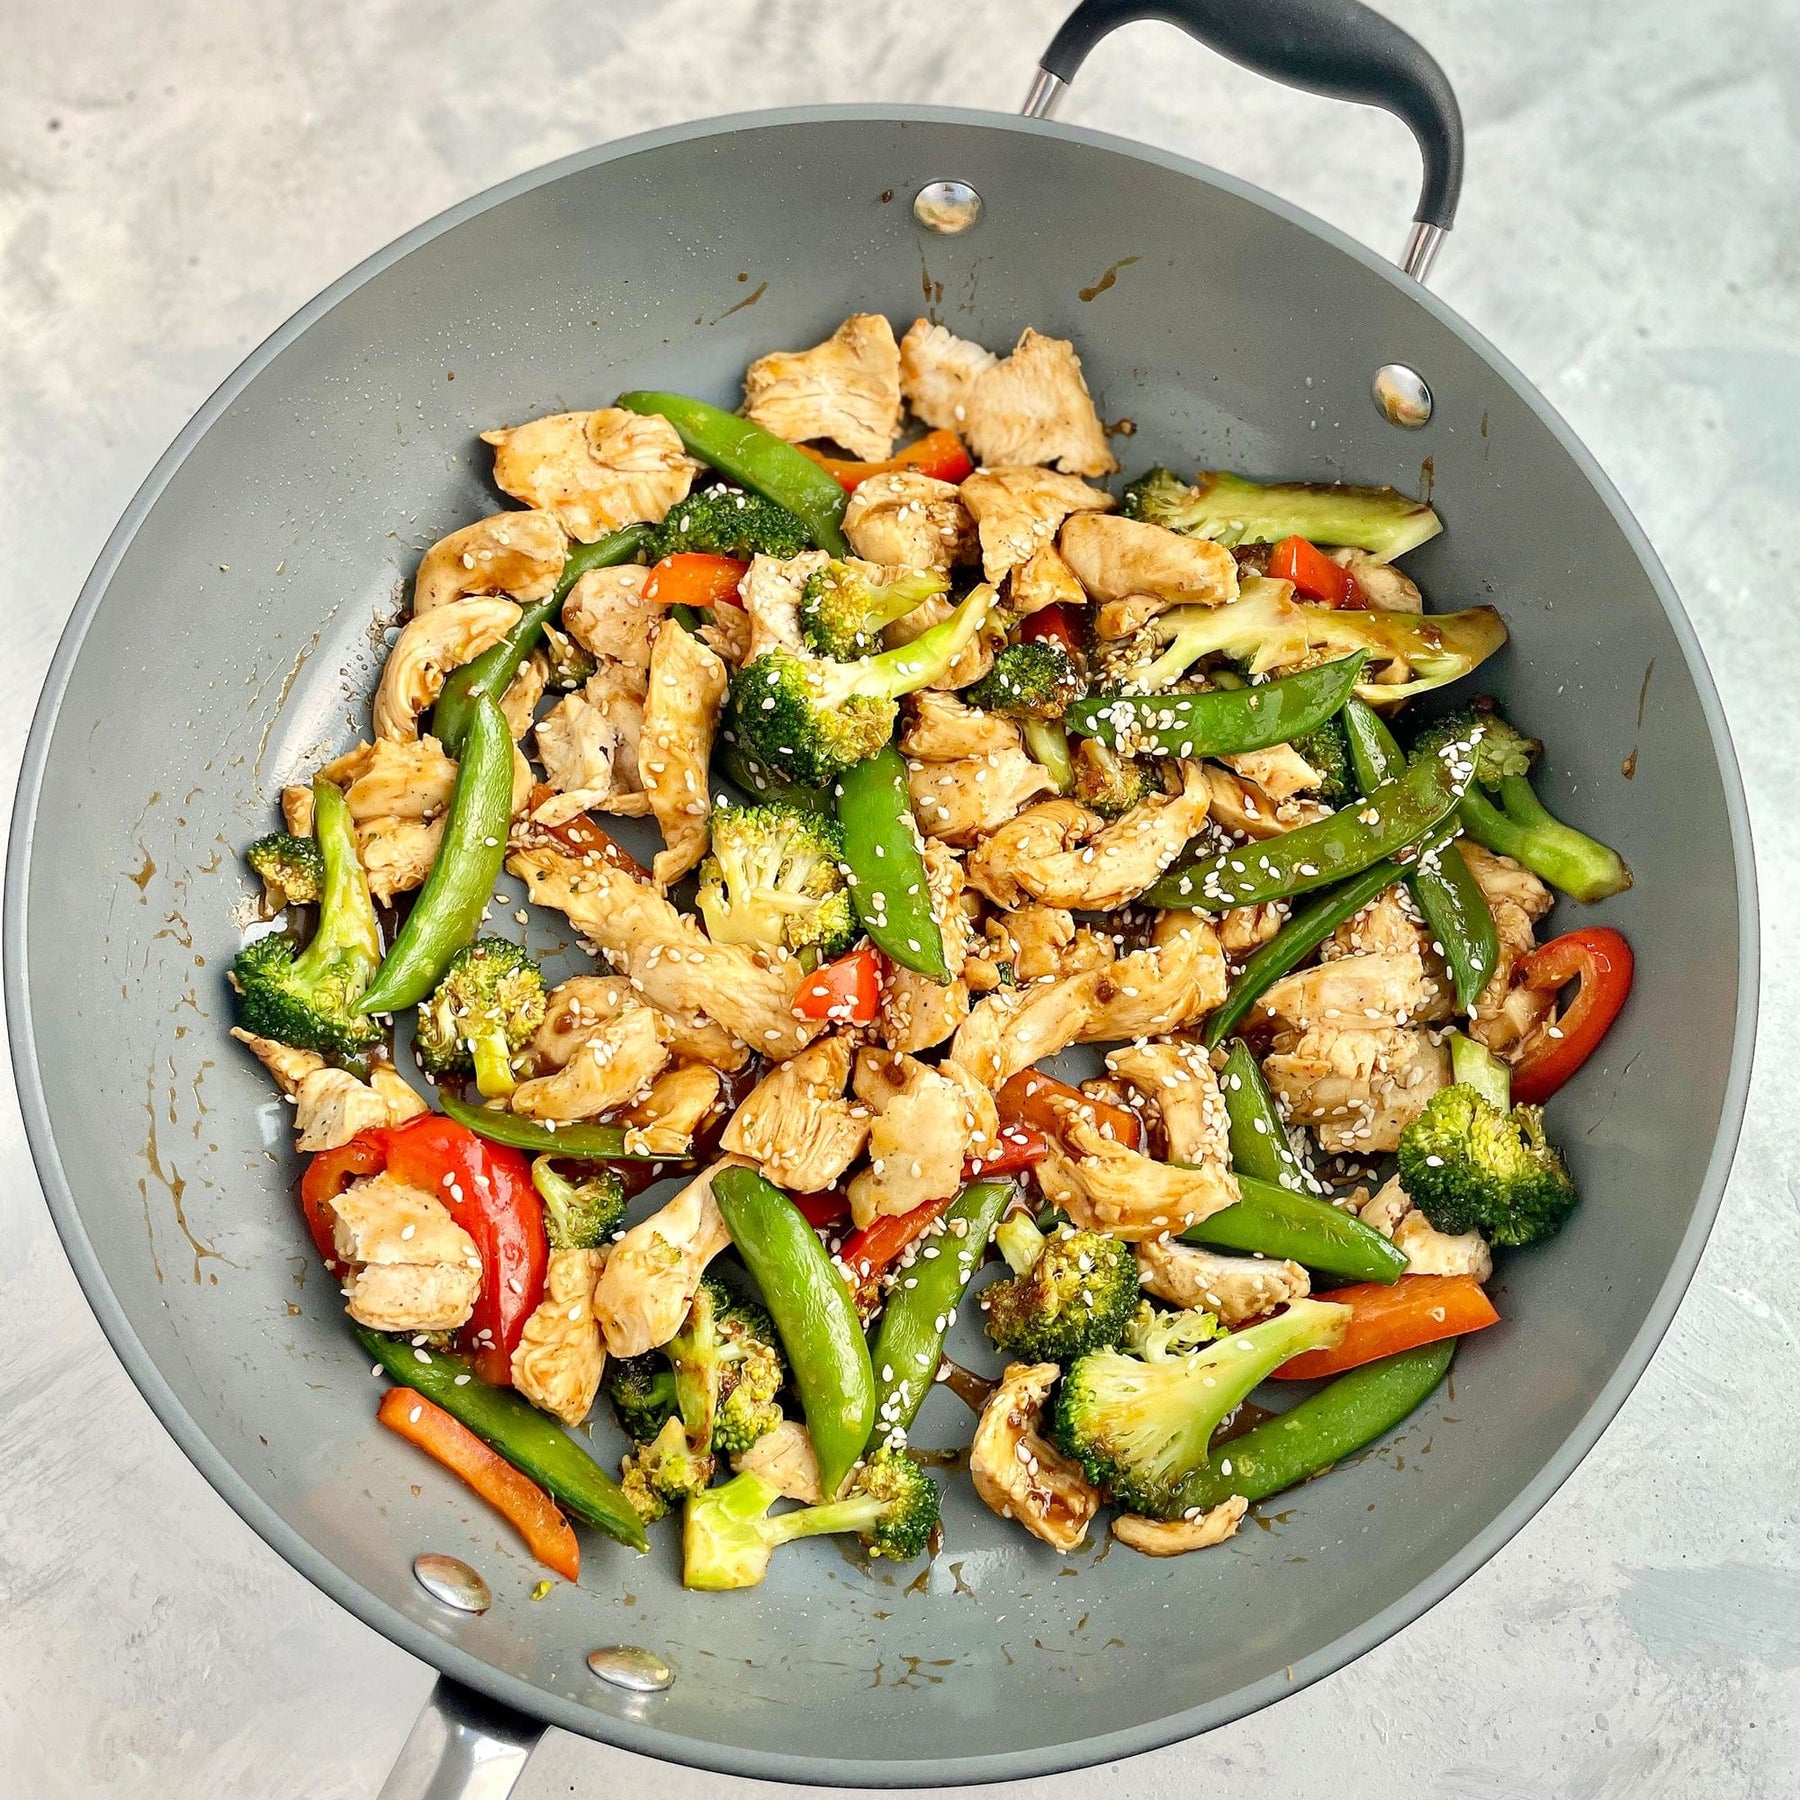 Treat yourself to some Teriyaki-style chicken! – Kevin's Natural Foods